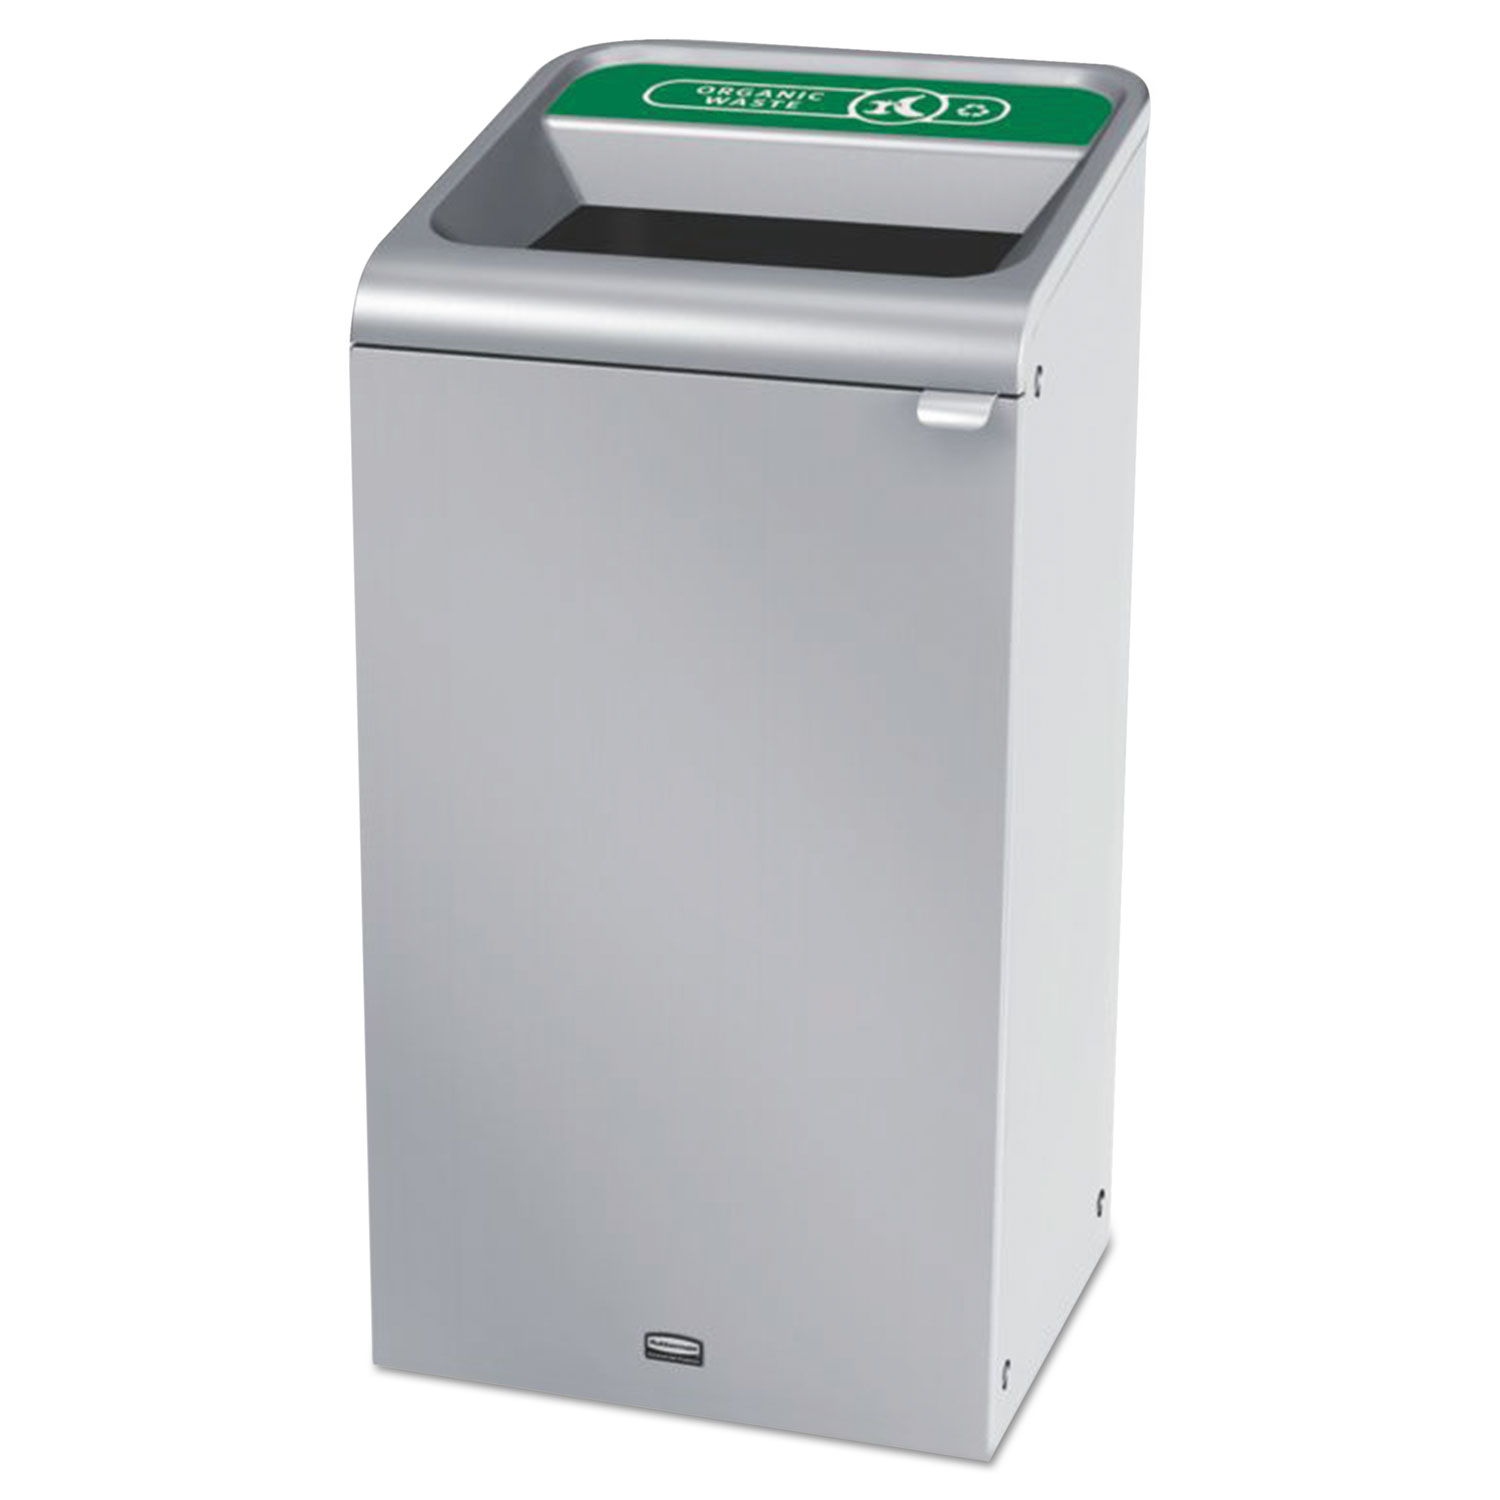 Configure Indoor Recycling Waste Receptacle, 23 gal, Stainless, Organic Waste